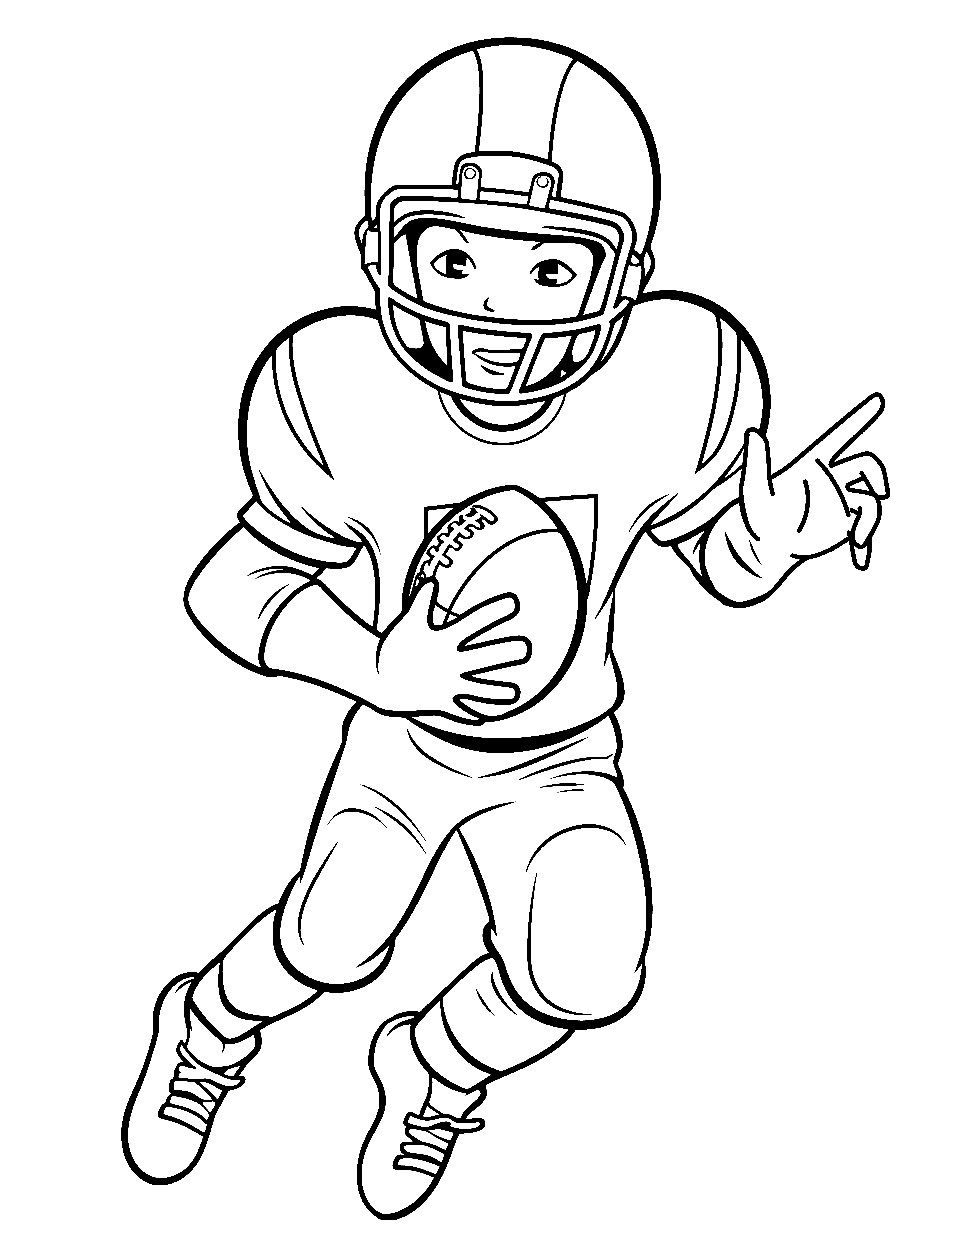 Charging Quarterback Coloring Page - A quarterback holding a football, ready to throw.